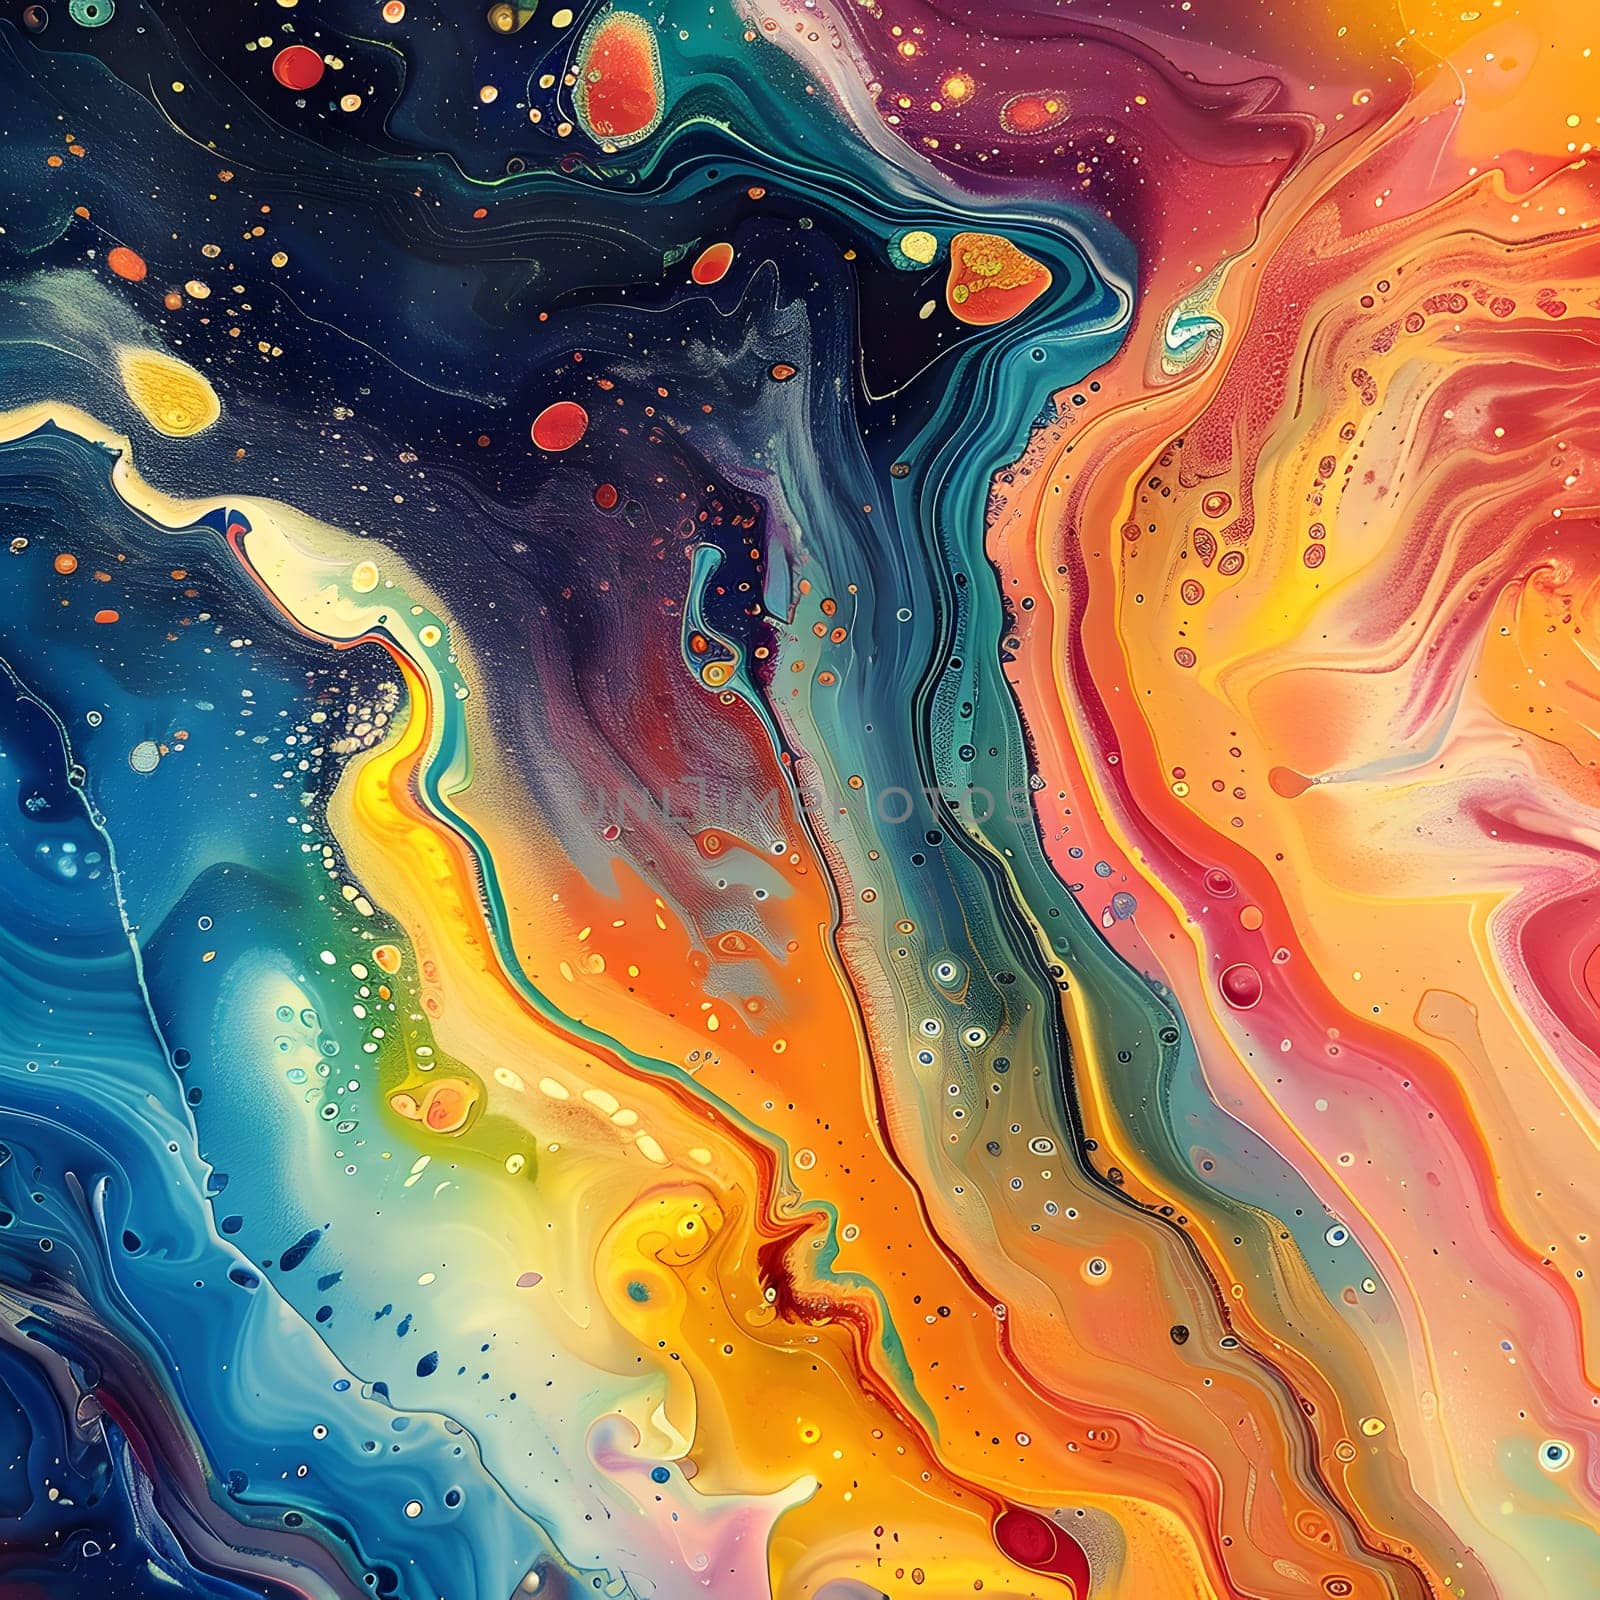 A closeup of a vibrant painting depicting a liquid world filled with azure hues, inspired by natures geological phenomena and aquatic organisms, captured in an artful display